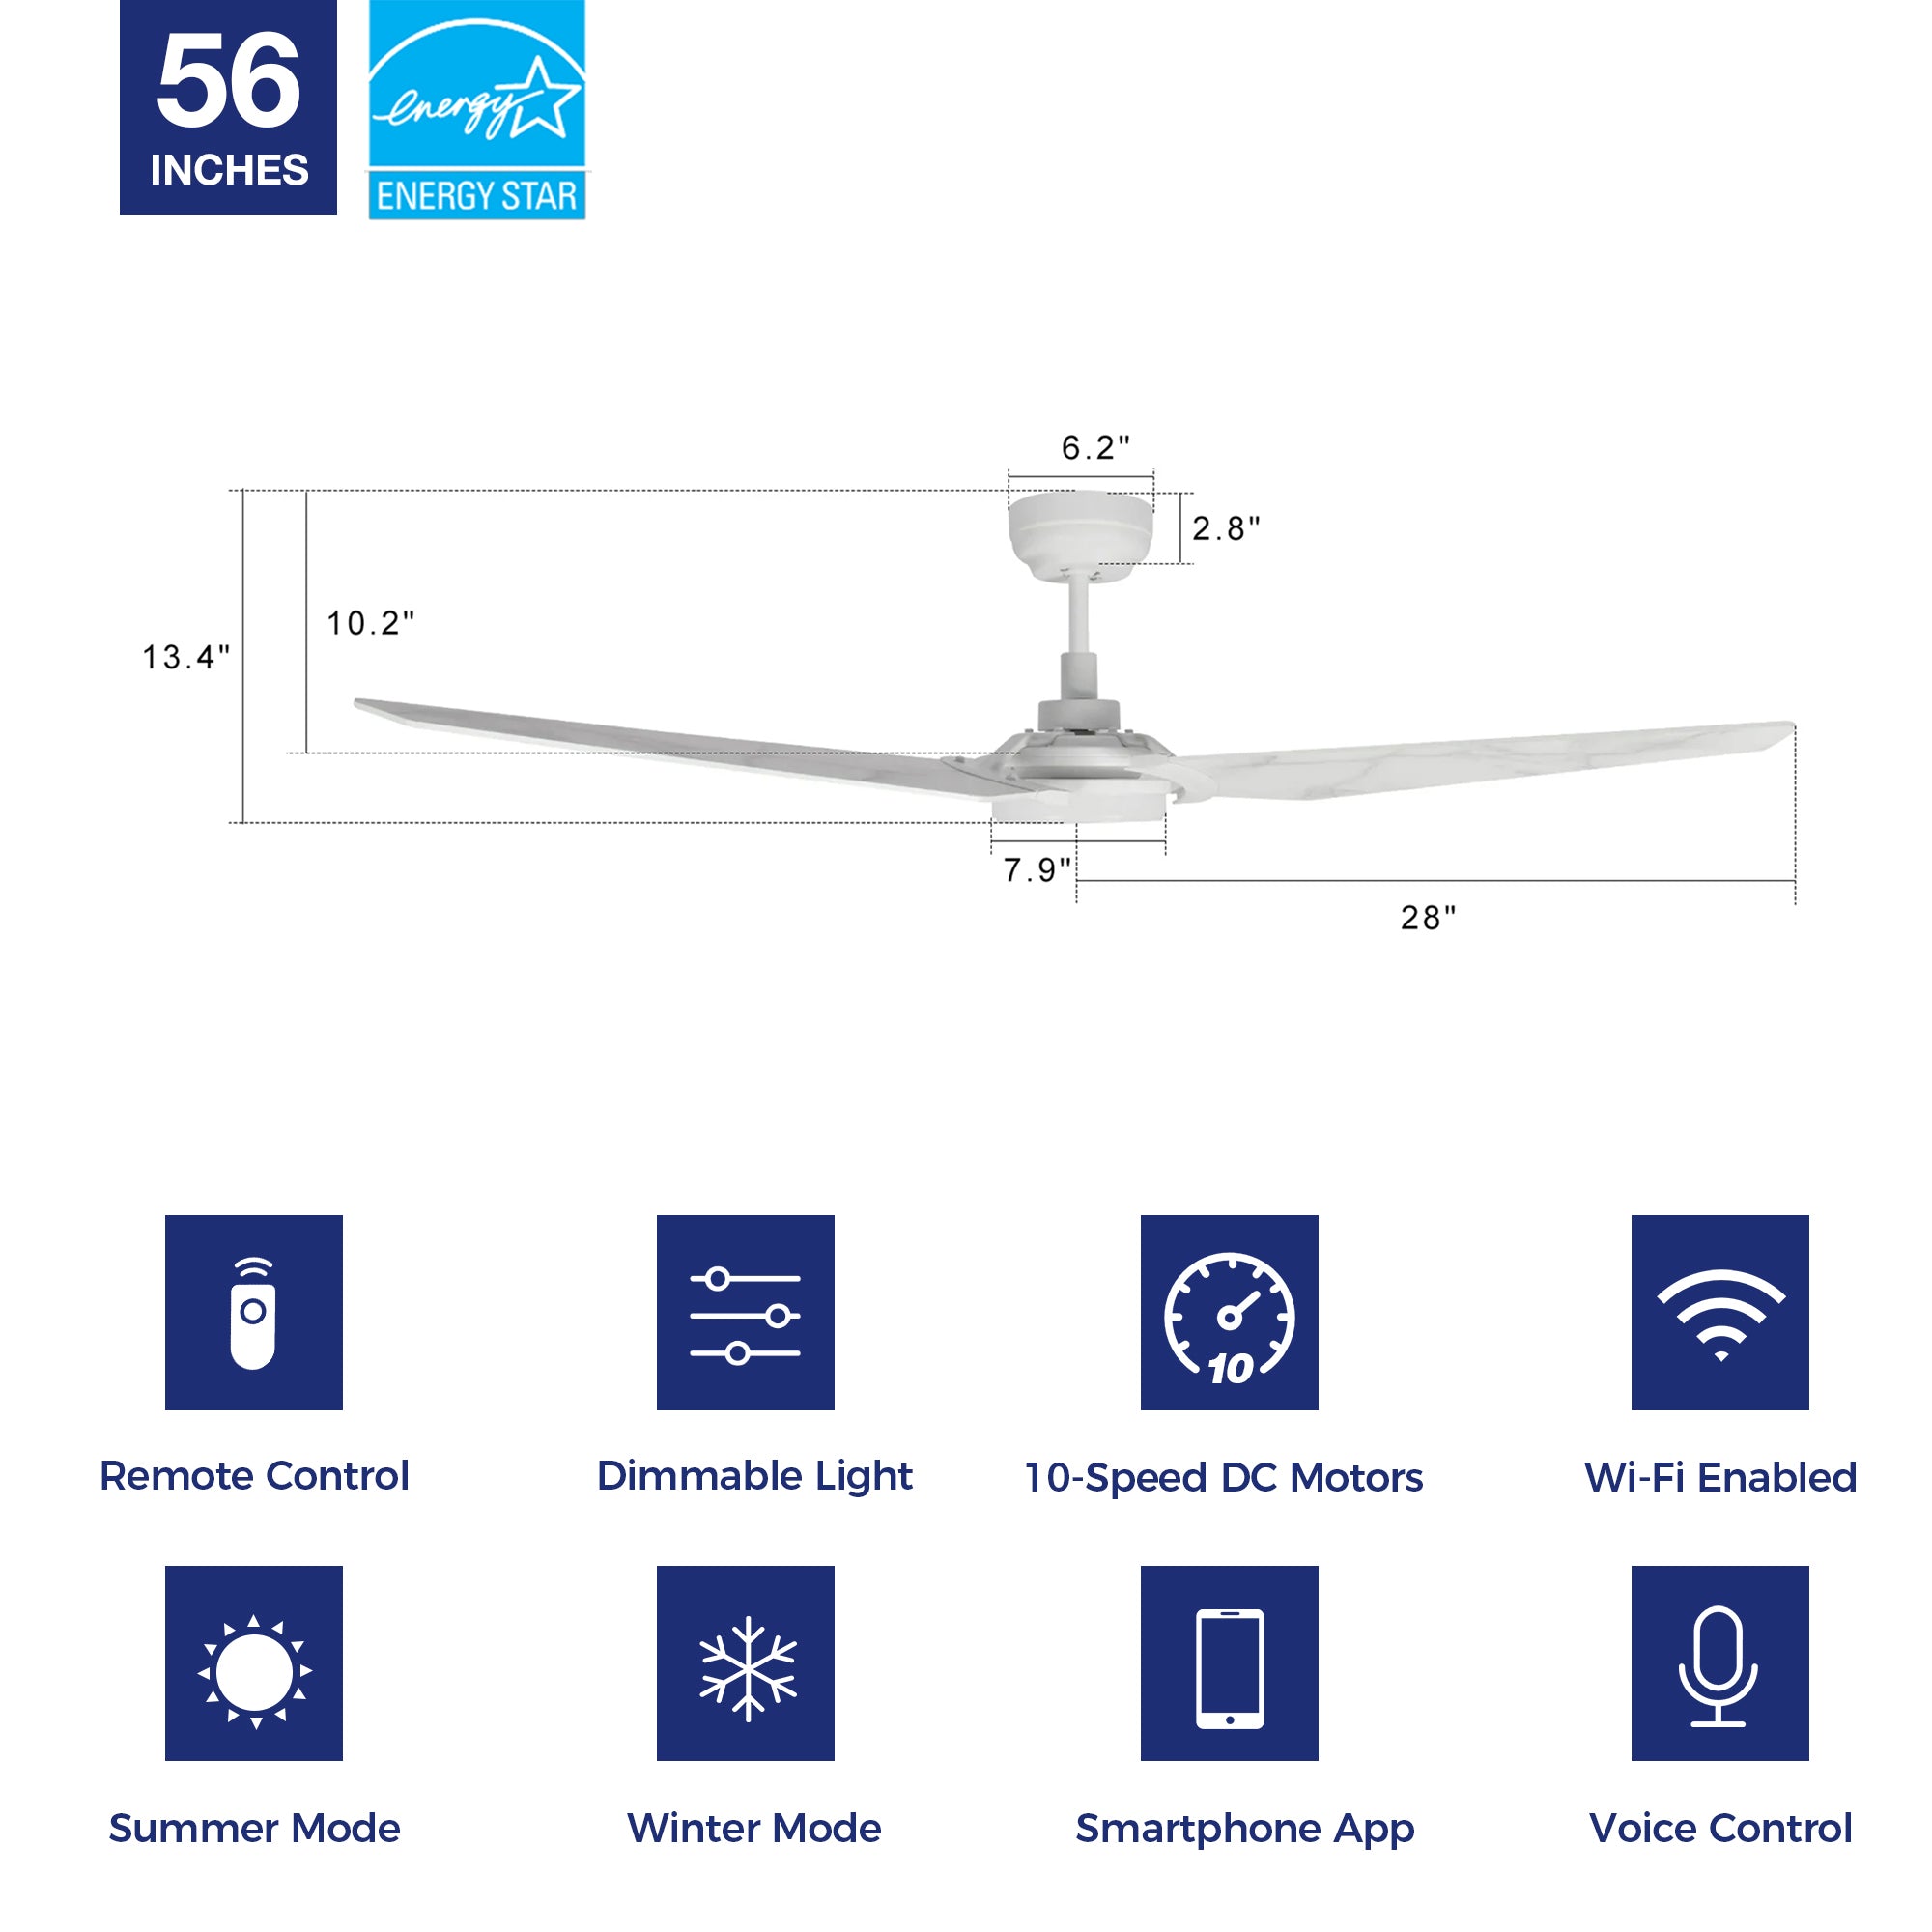 Trailblazer Outdoor 56&quot; Smart Ceiling Fan with LED Light Kit-White Base and White Marble Pattern Fan Blades. The fan features Remote control, Wi-Fi apps and Voice control technology (compatible with Amazon Alexa and Google Home Assistant ) to set fan preferences. Equipping with 2150-lumens LED lights and 10-speed DC Motor (4400CFM airflow output), bring you cool and bright.  